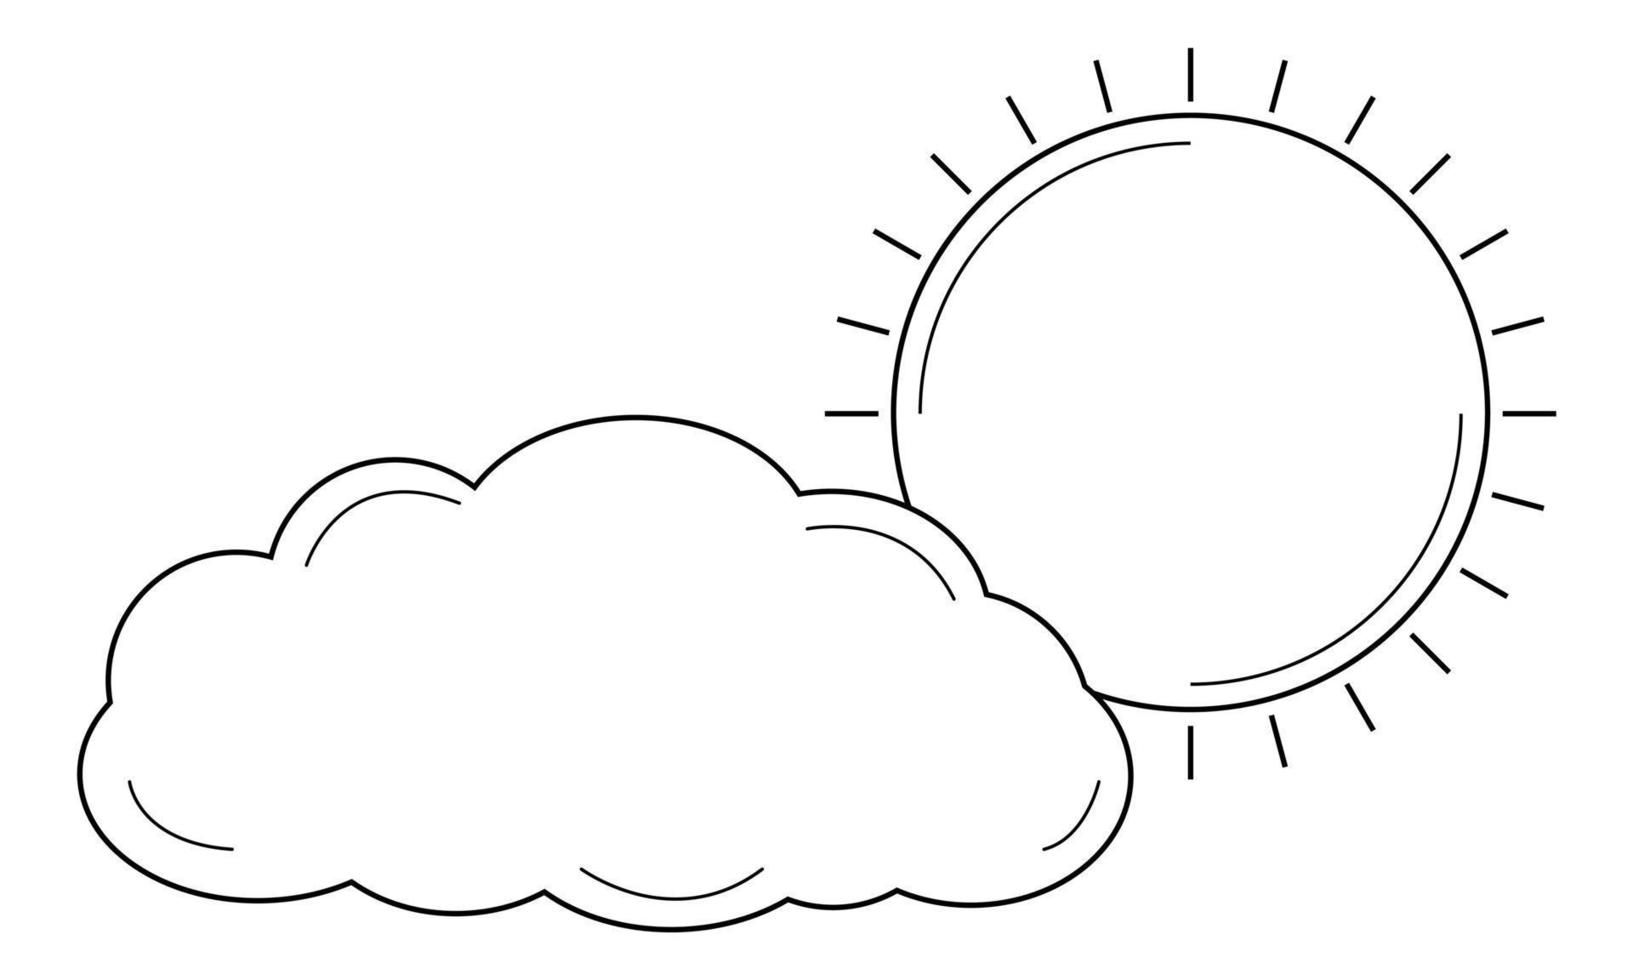 Hand drawn sun coming out from behind a cloud. Abstract image of uplifting mood. Doodle style. Sketch. Vector illustration